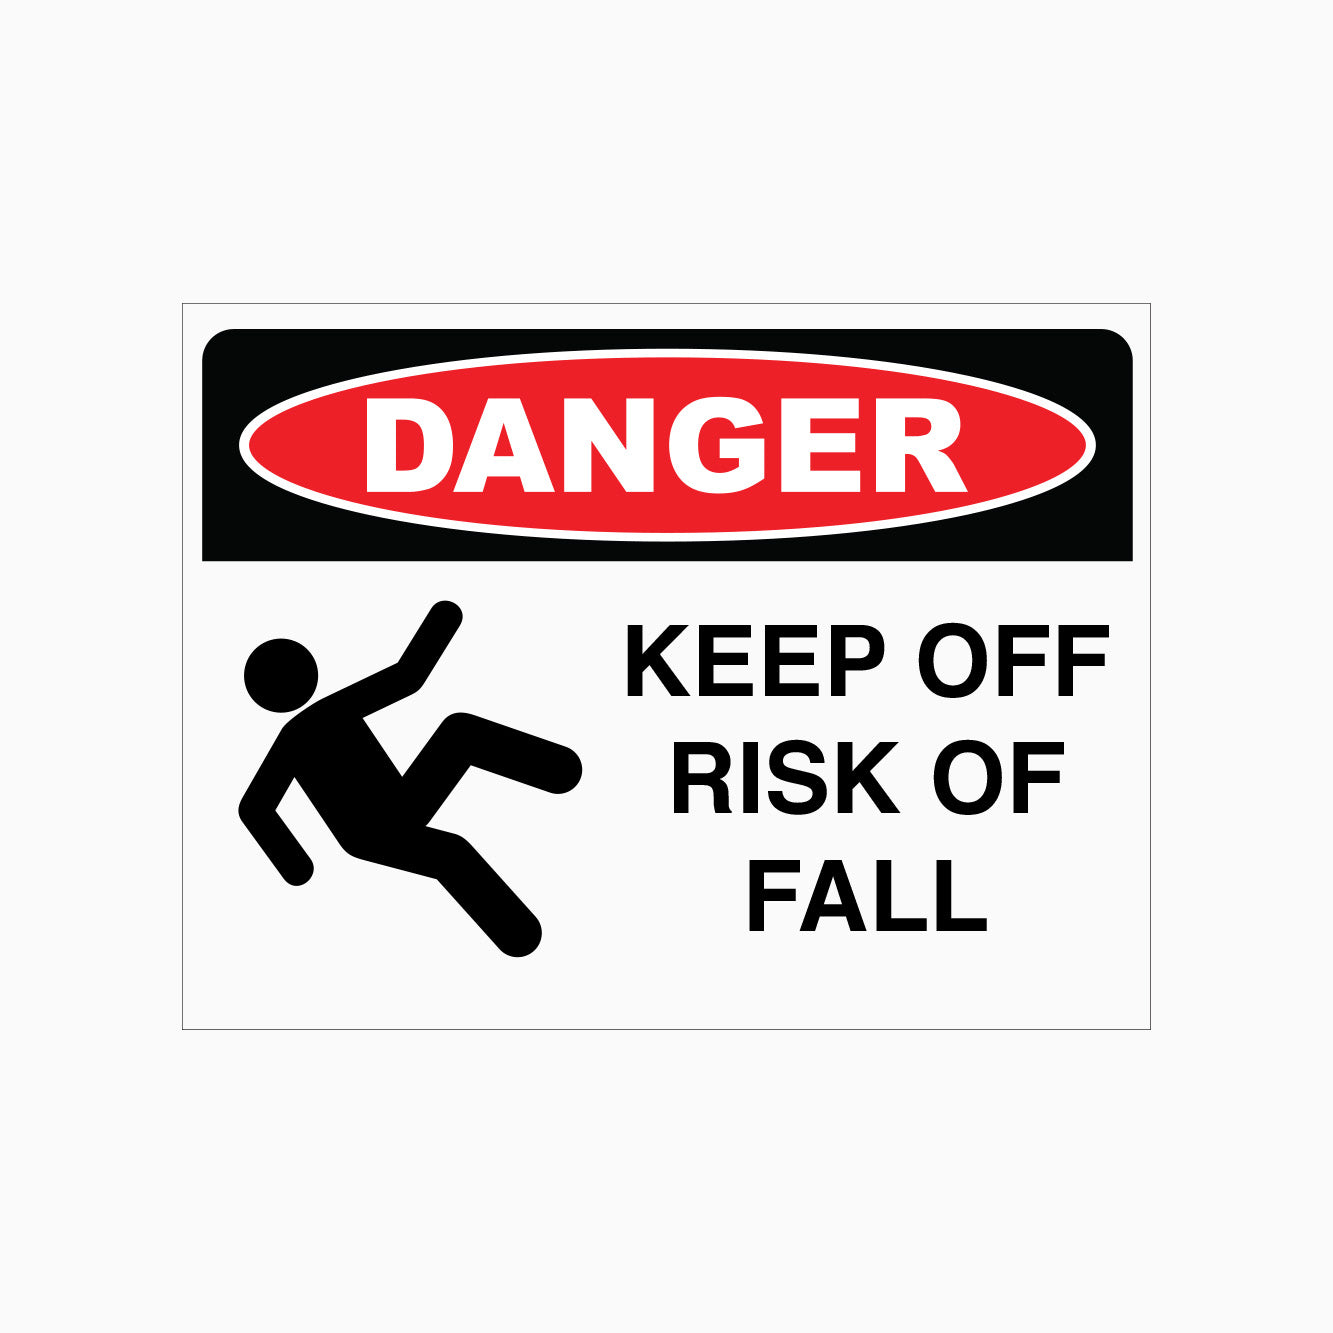 DANGER SIGN - KEEP OFF RISK OF FALL SIGN